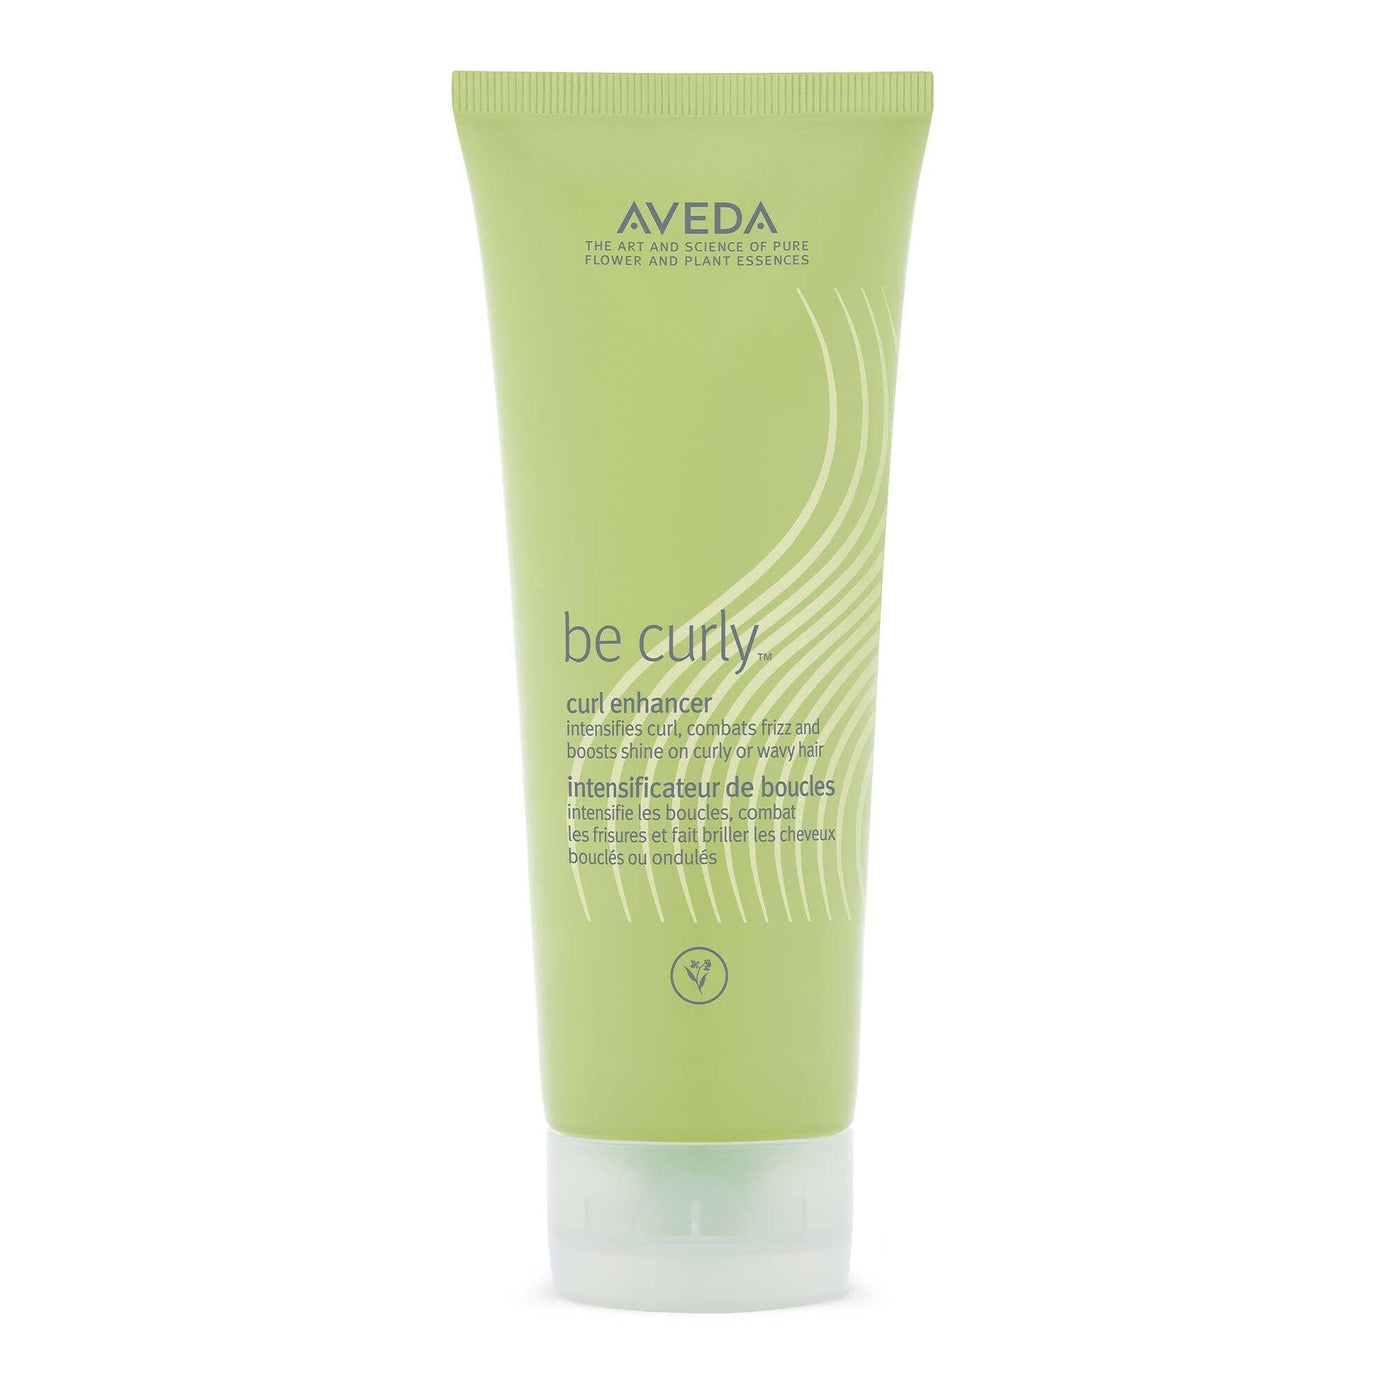 Aveda Styling Be curly curl enhancer 200ml